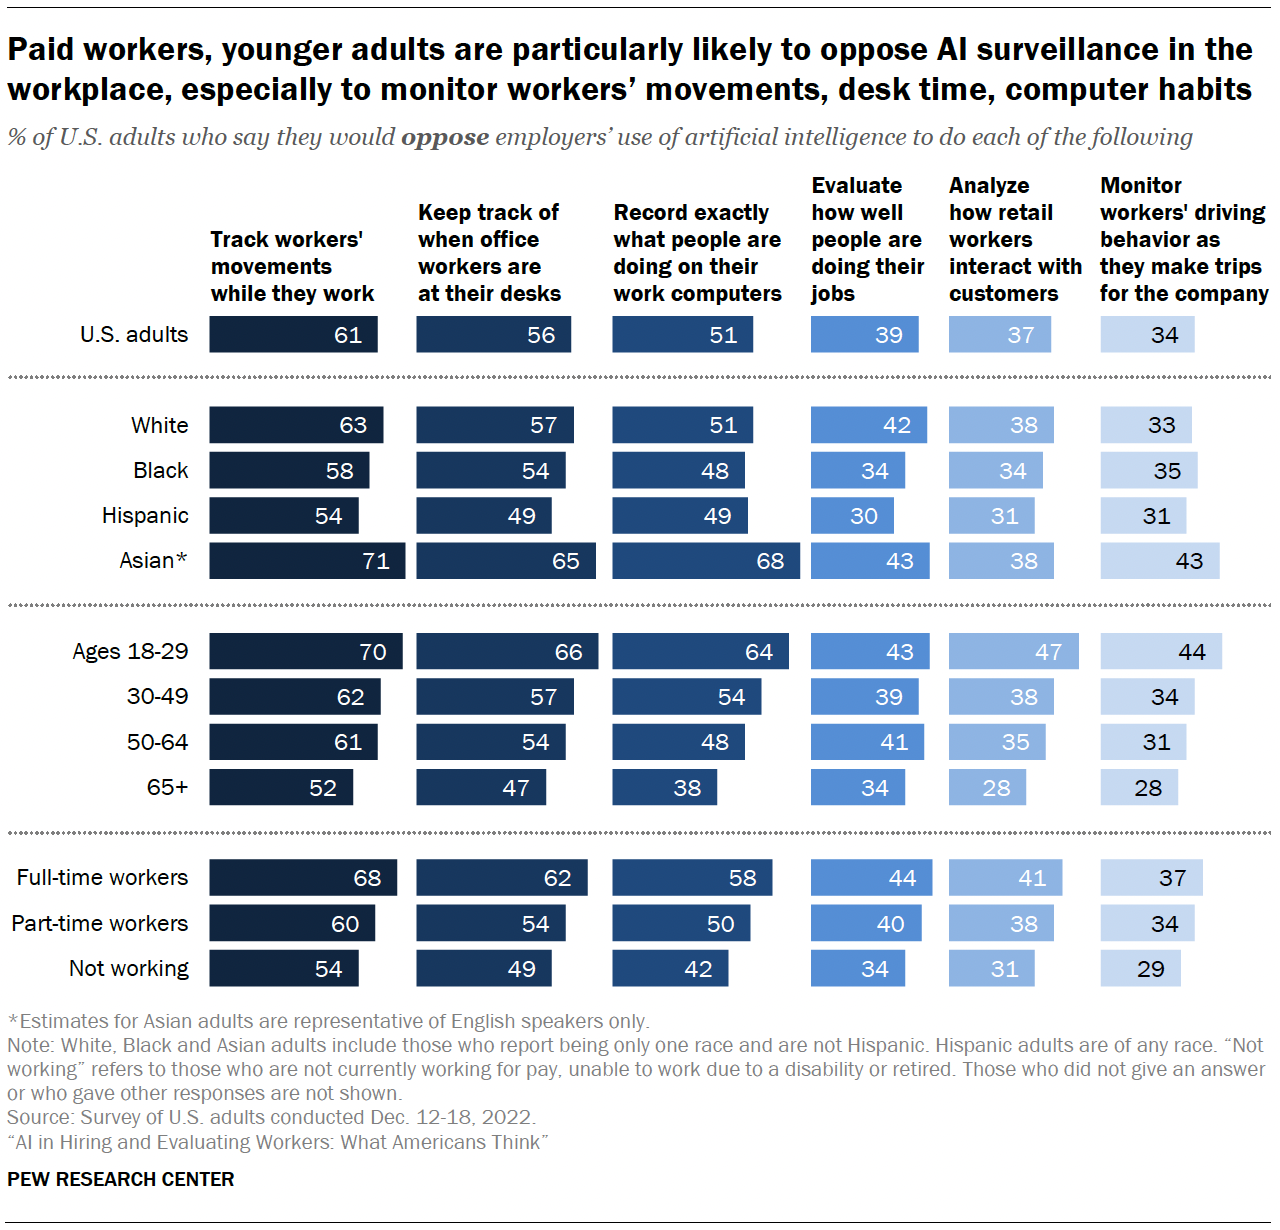 Paid workers, younger adults are particularly likely to oppose AI surveillance in the workplace, especially to monitor workers’ movements, desk time, computer habits